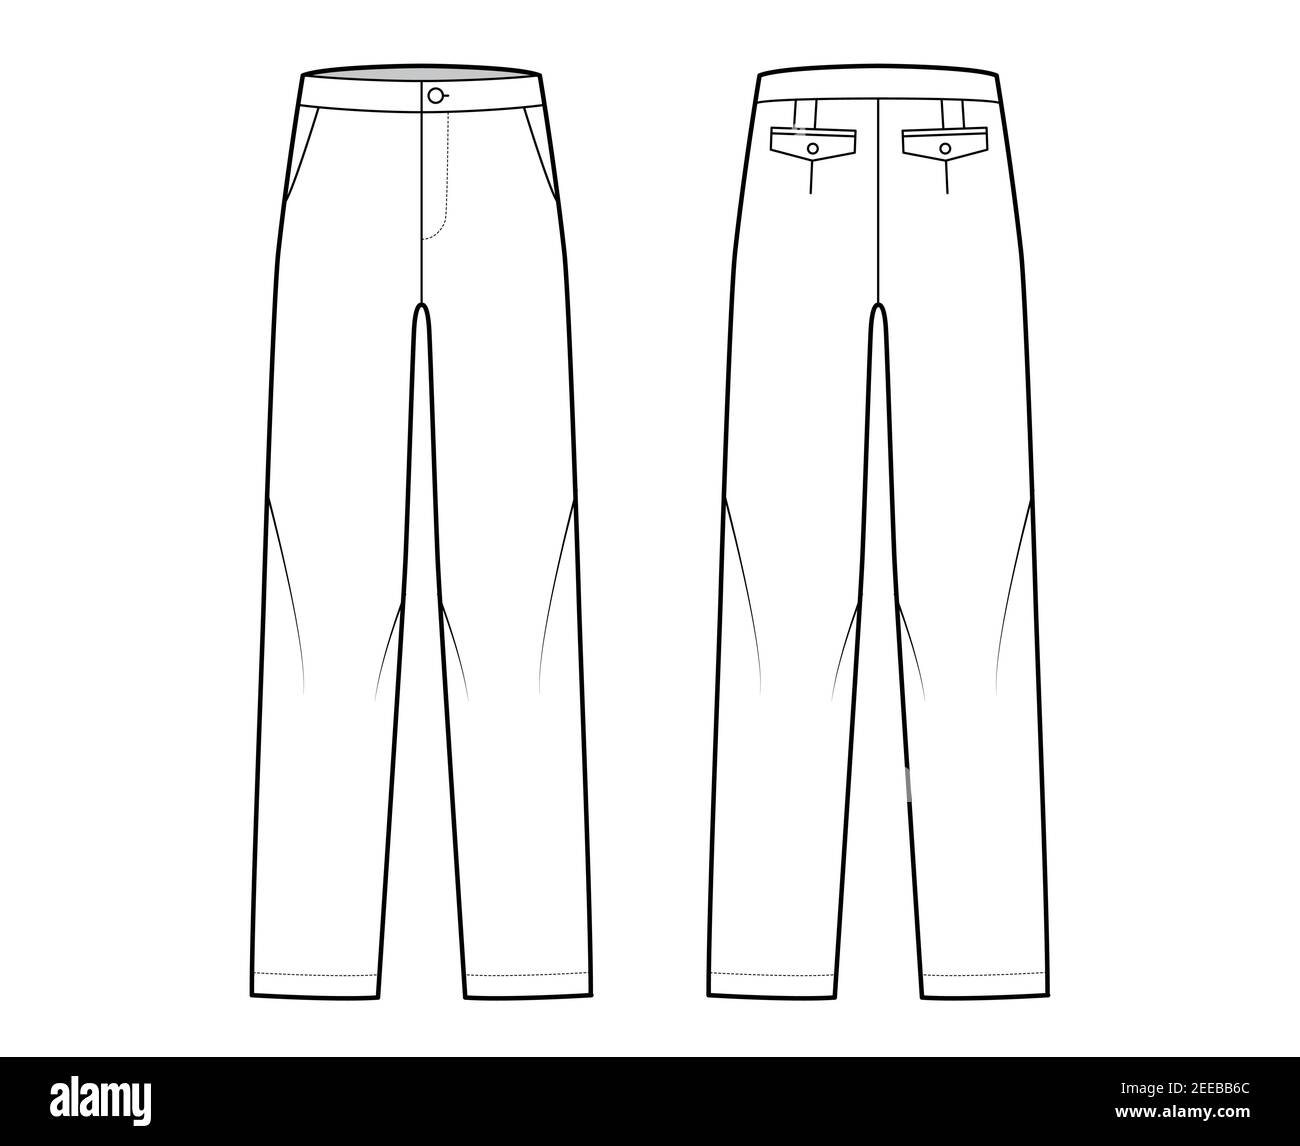 Pants straight silhouette technical fashion illustration with flat front,  low waist, rise, full length, slant, flap pockets. Flat trousers apparel  template back, white color. Women, unisex CAD mockup Stock Vector Image 